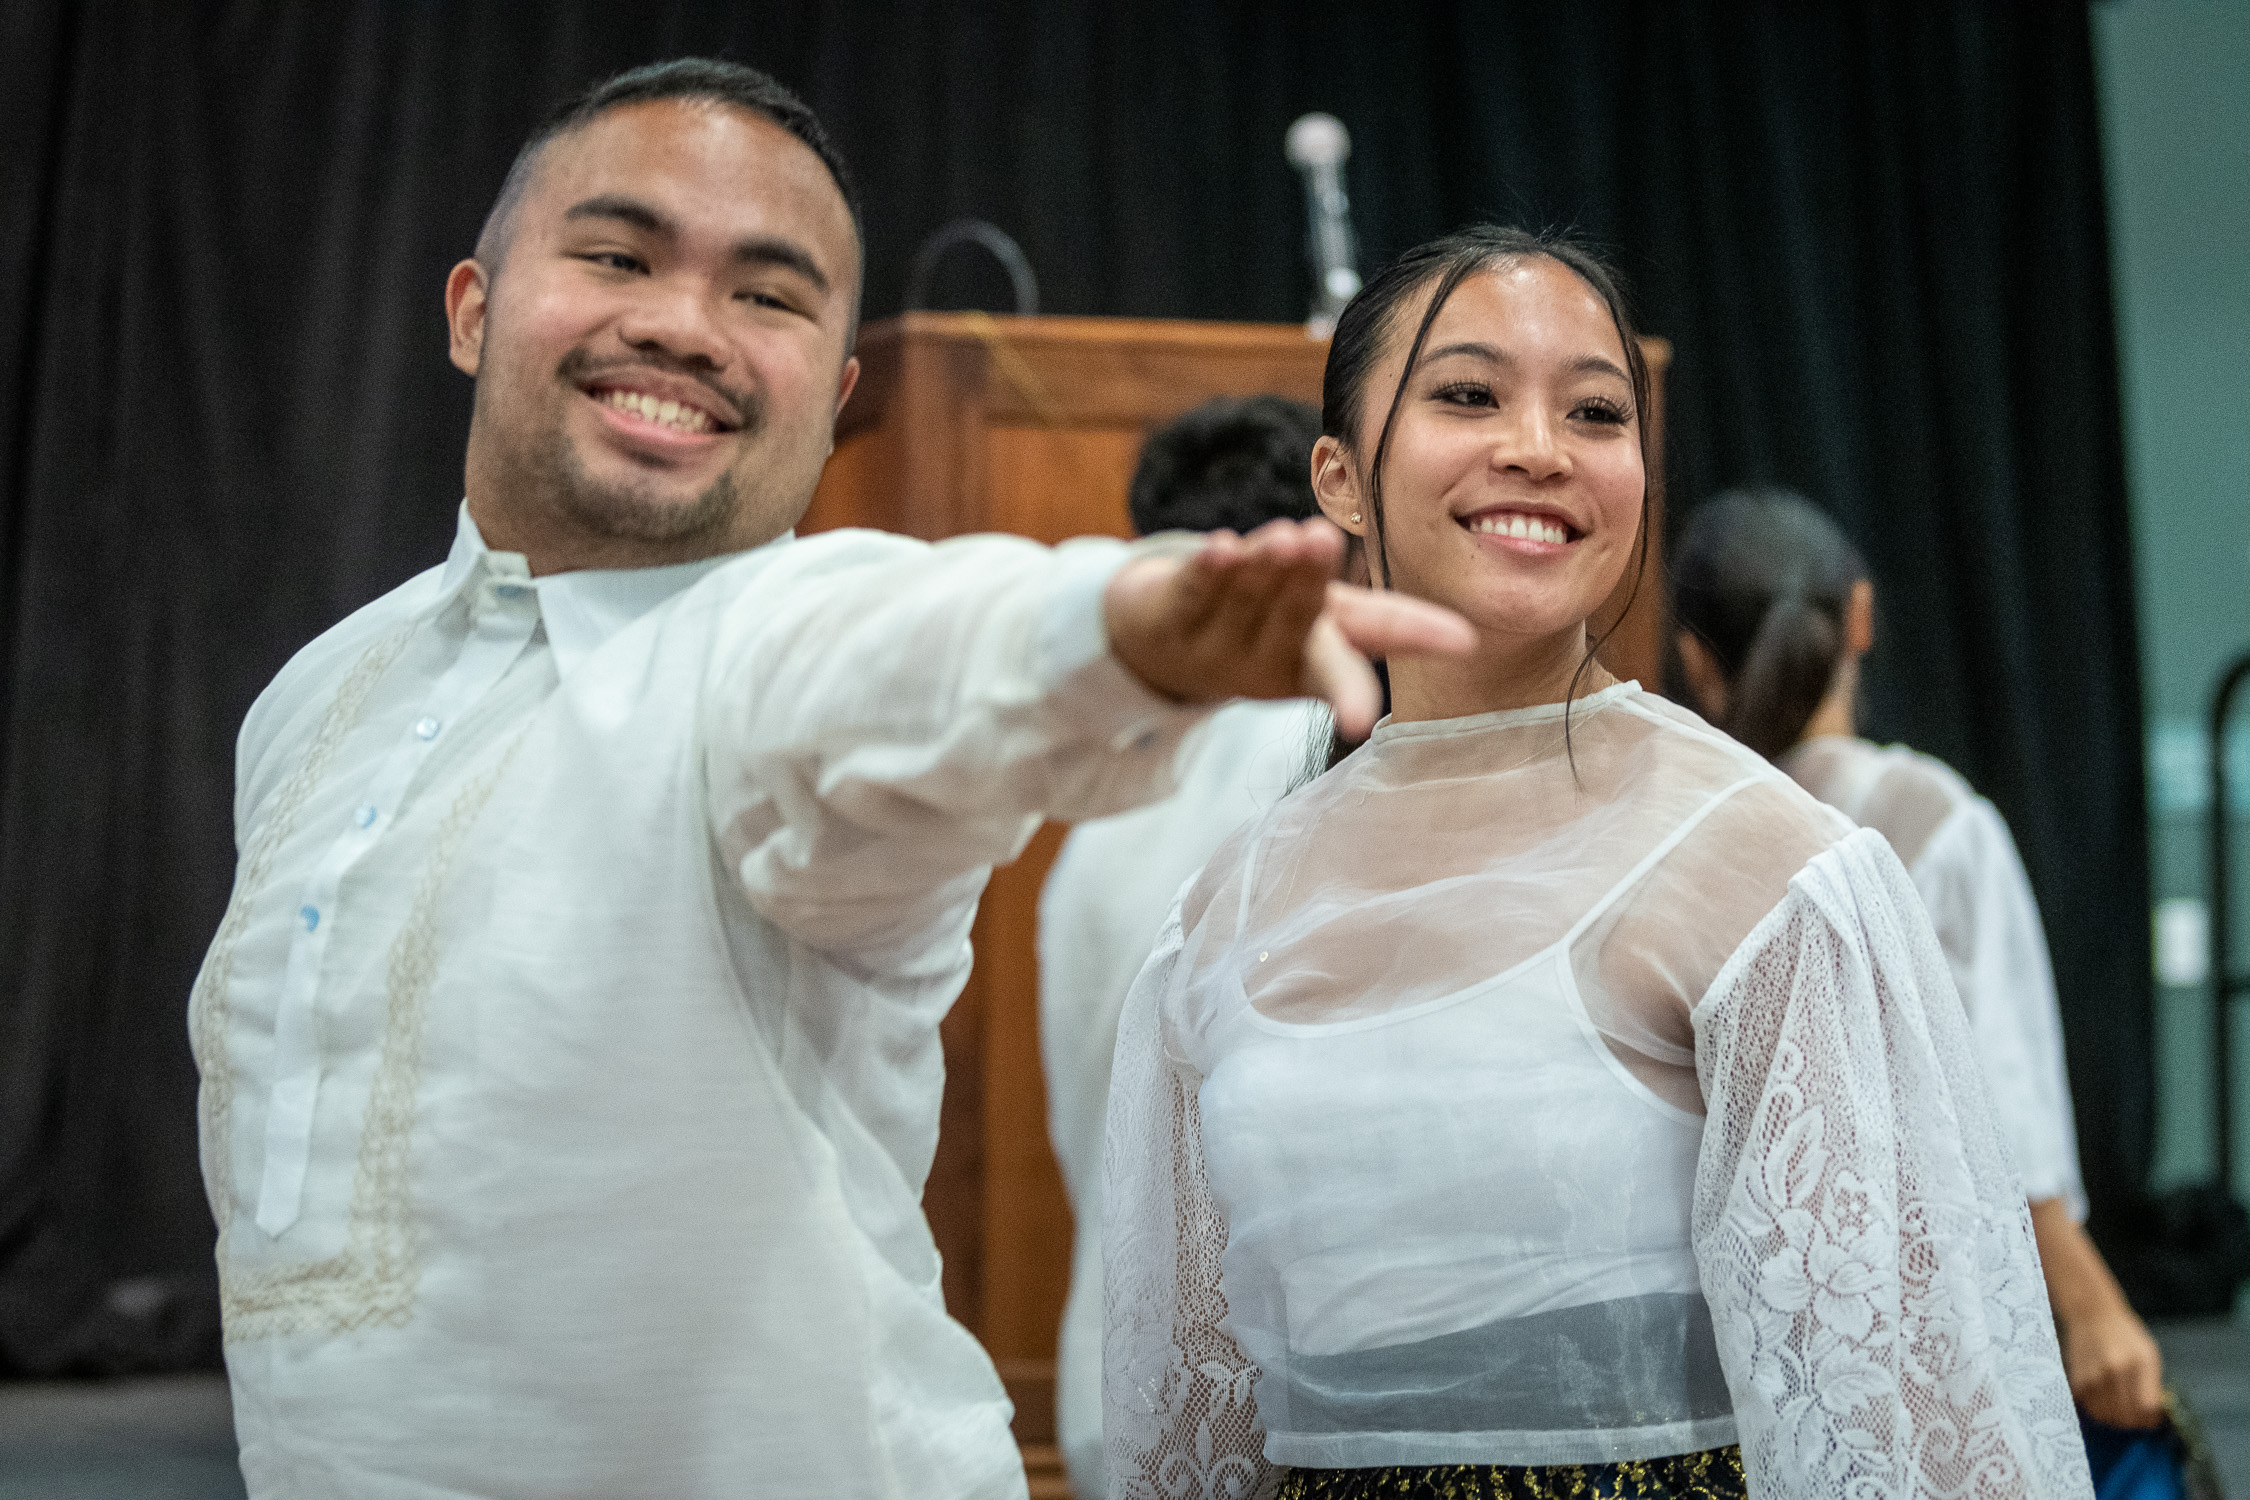 Two students performing a Filipino cultural dance.